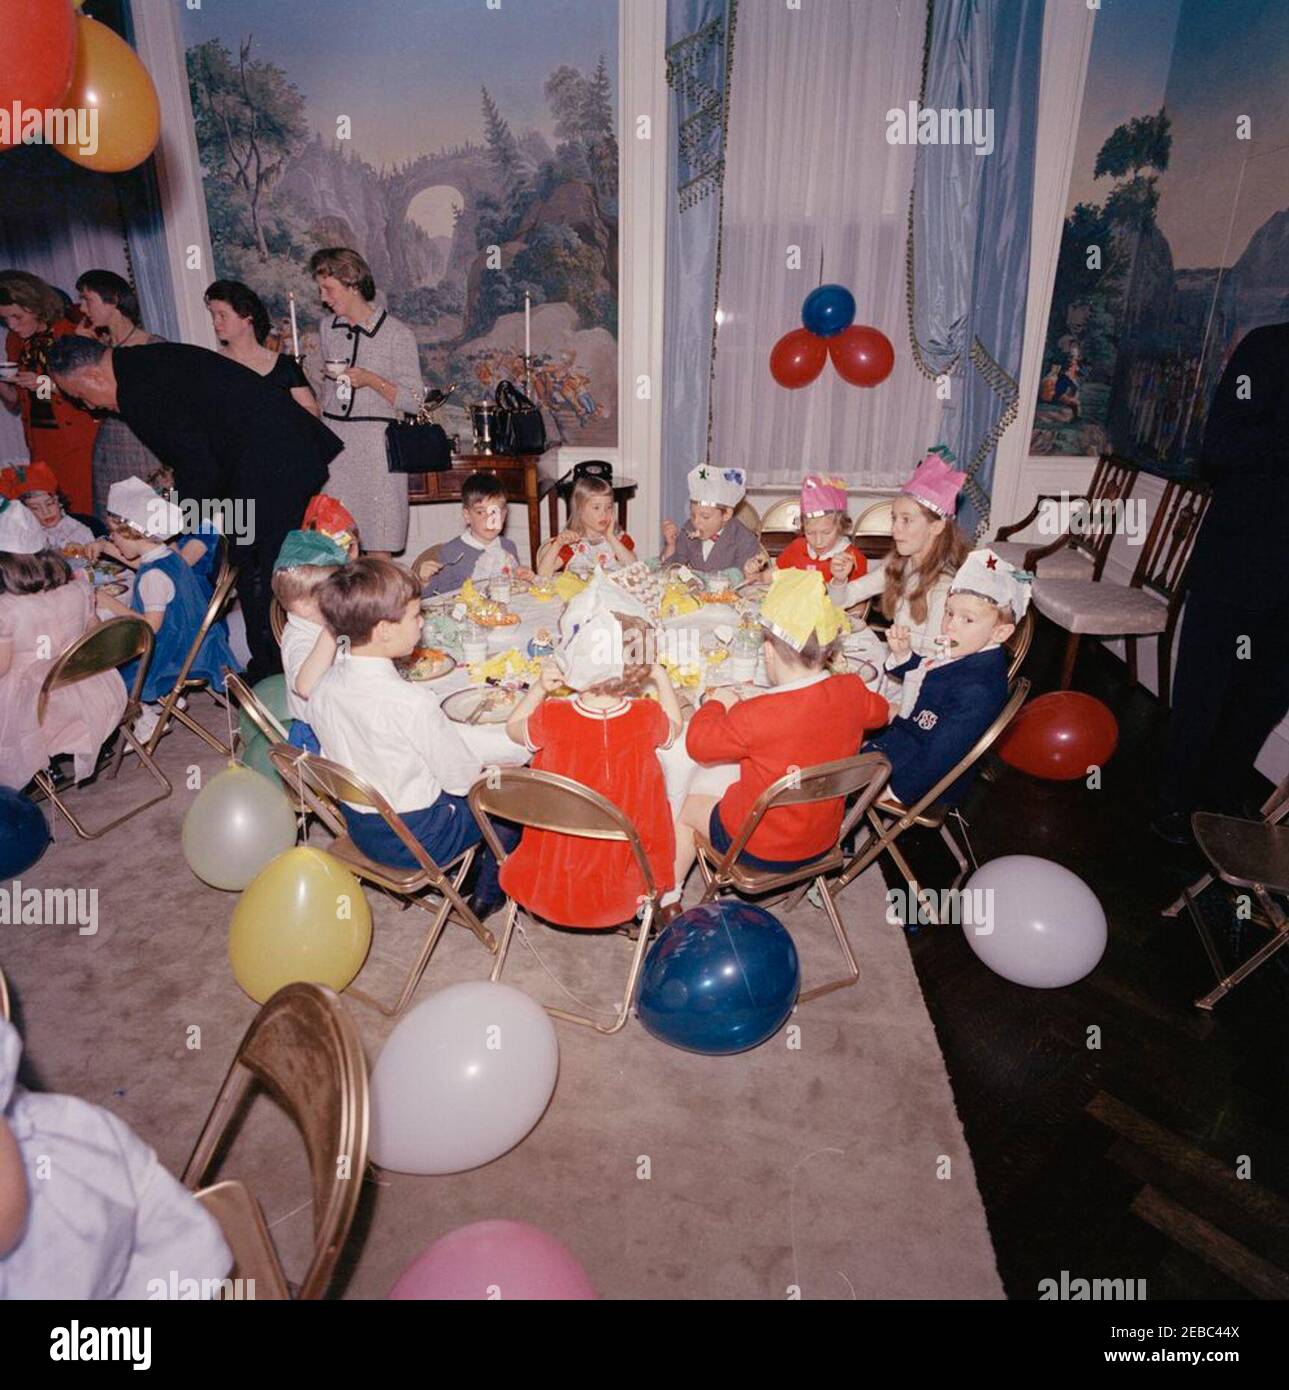 Birthday party for Caroline Kennedy and John F. Kennedy, Jr.. Young children eat at a table in the Presidentu2019s Dining Room (Residence) of the White House, Washington, D.C., during a joint birthday party for Caroline Kennedy and John F. Kennedy, Jr.; White House butler, John W. Ficklin (leaning down), stands at left. Stock Photo